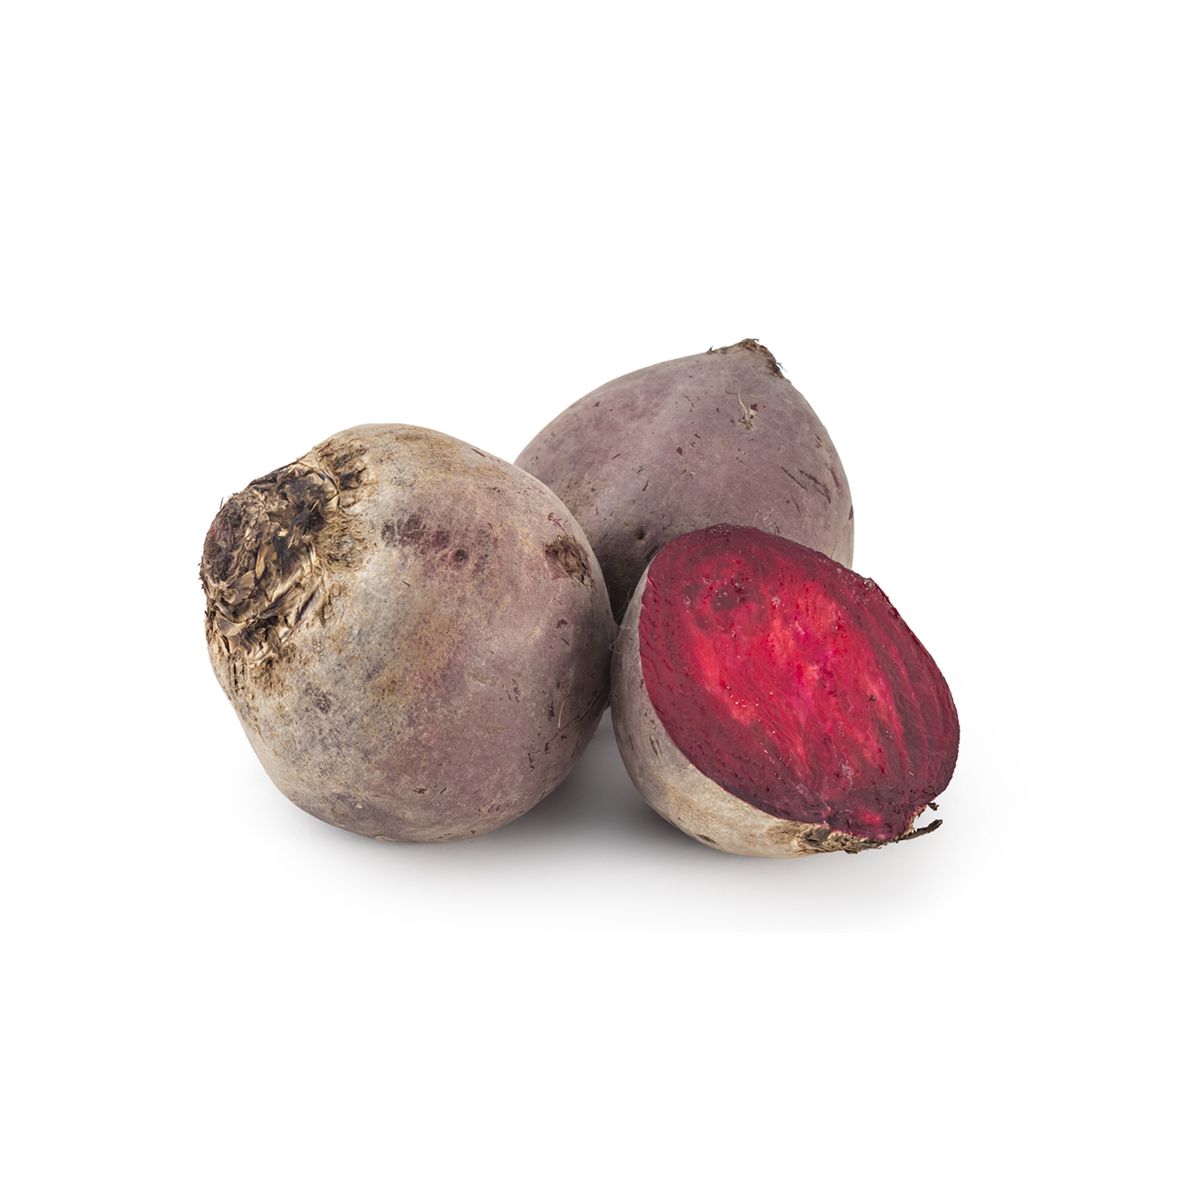 BoxNCase Large Red Beets